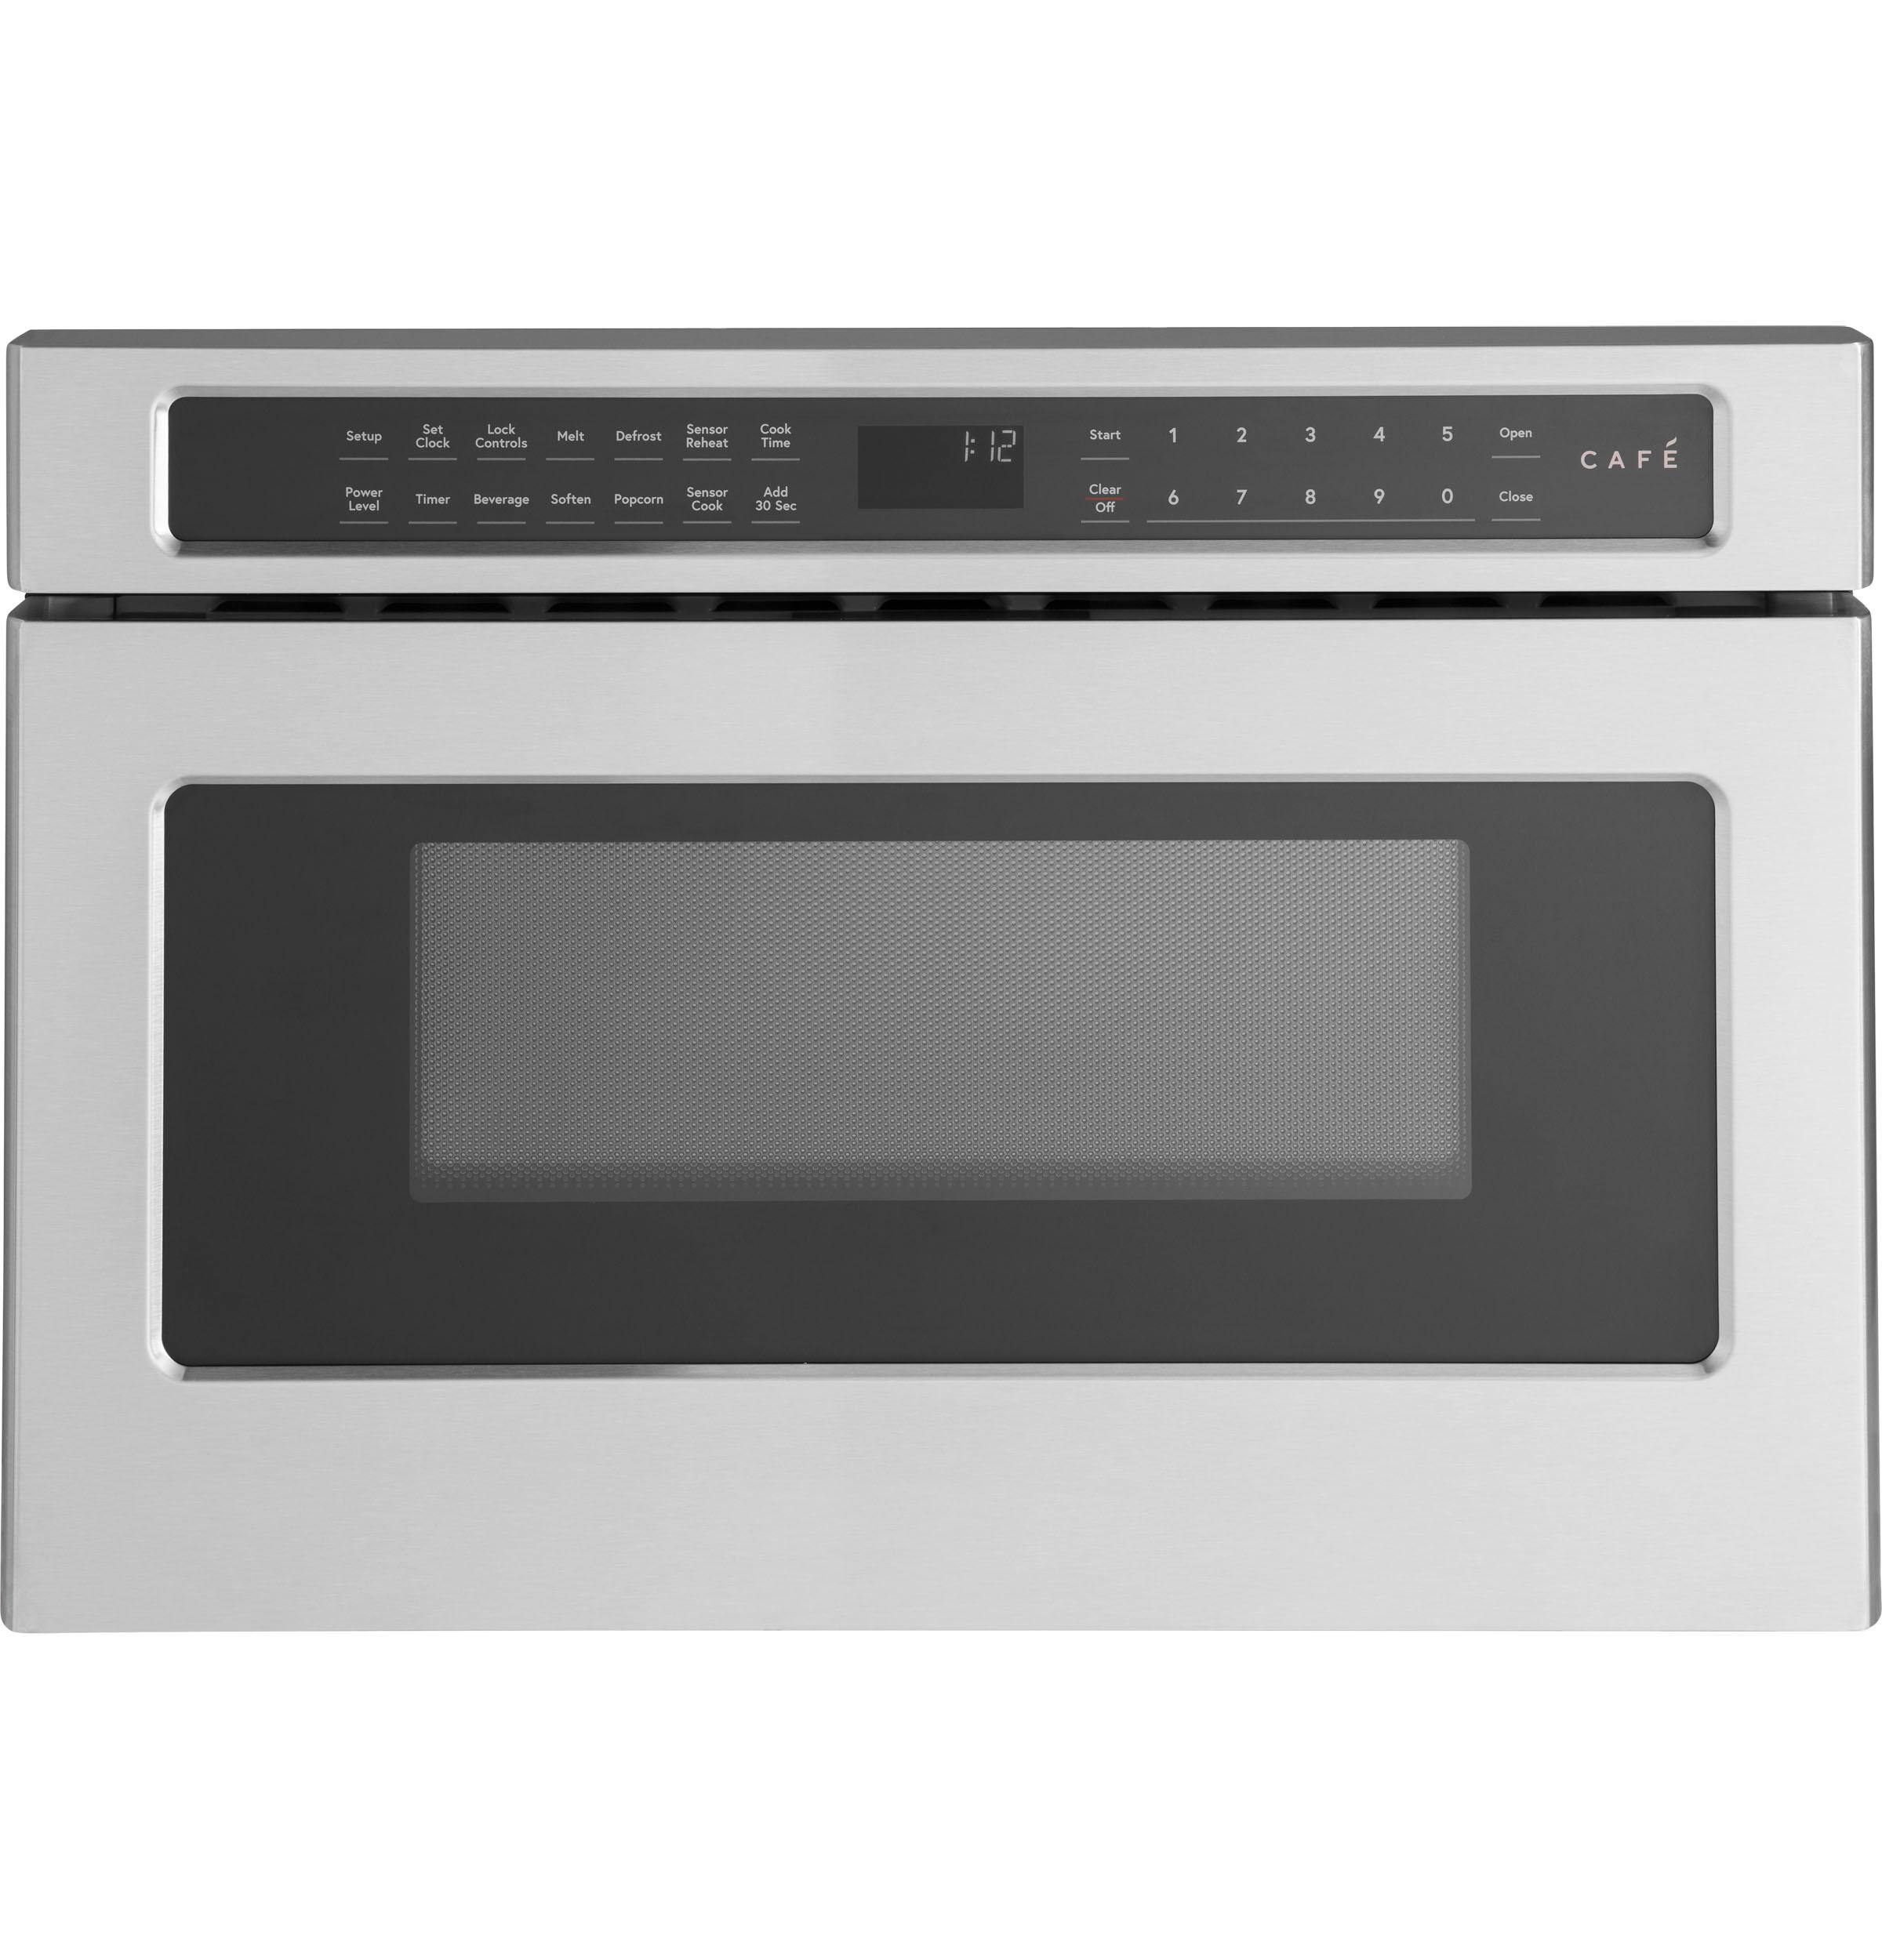 CAFE CWL112P2RS1 Built-In Microwave Drawer Oven - Stainless Steel